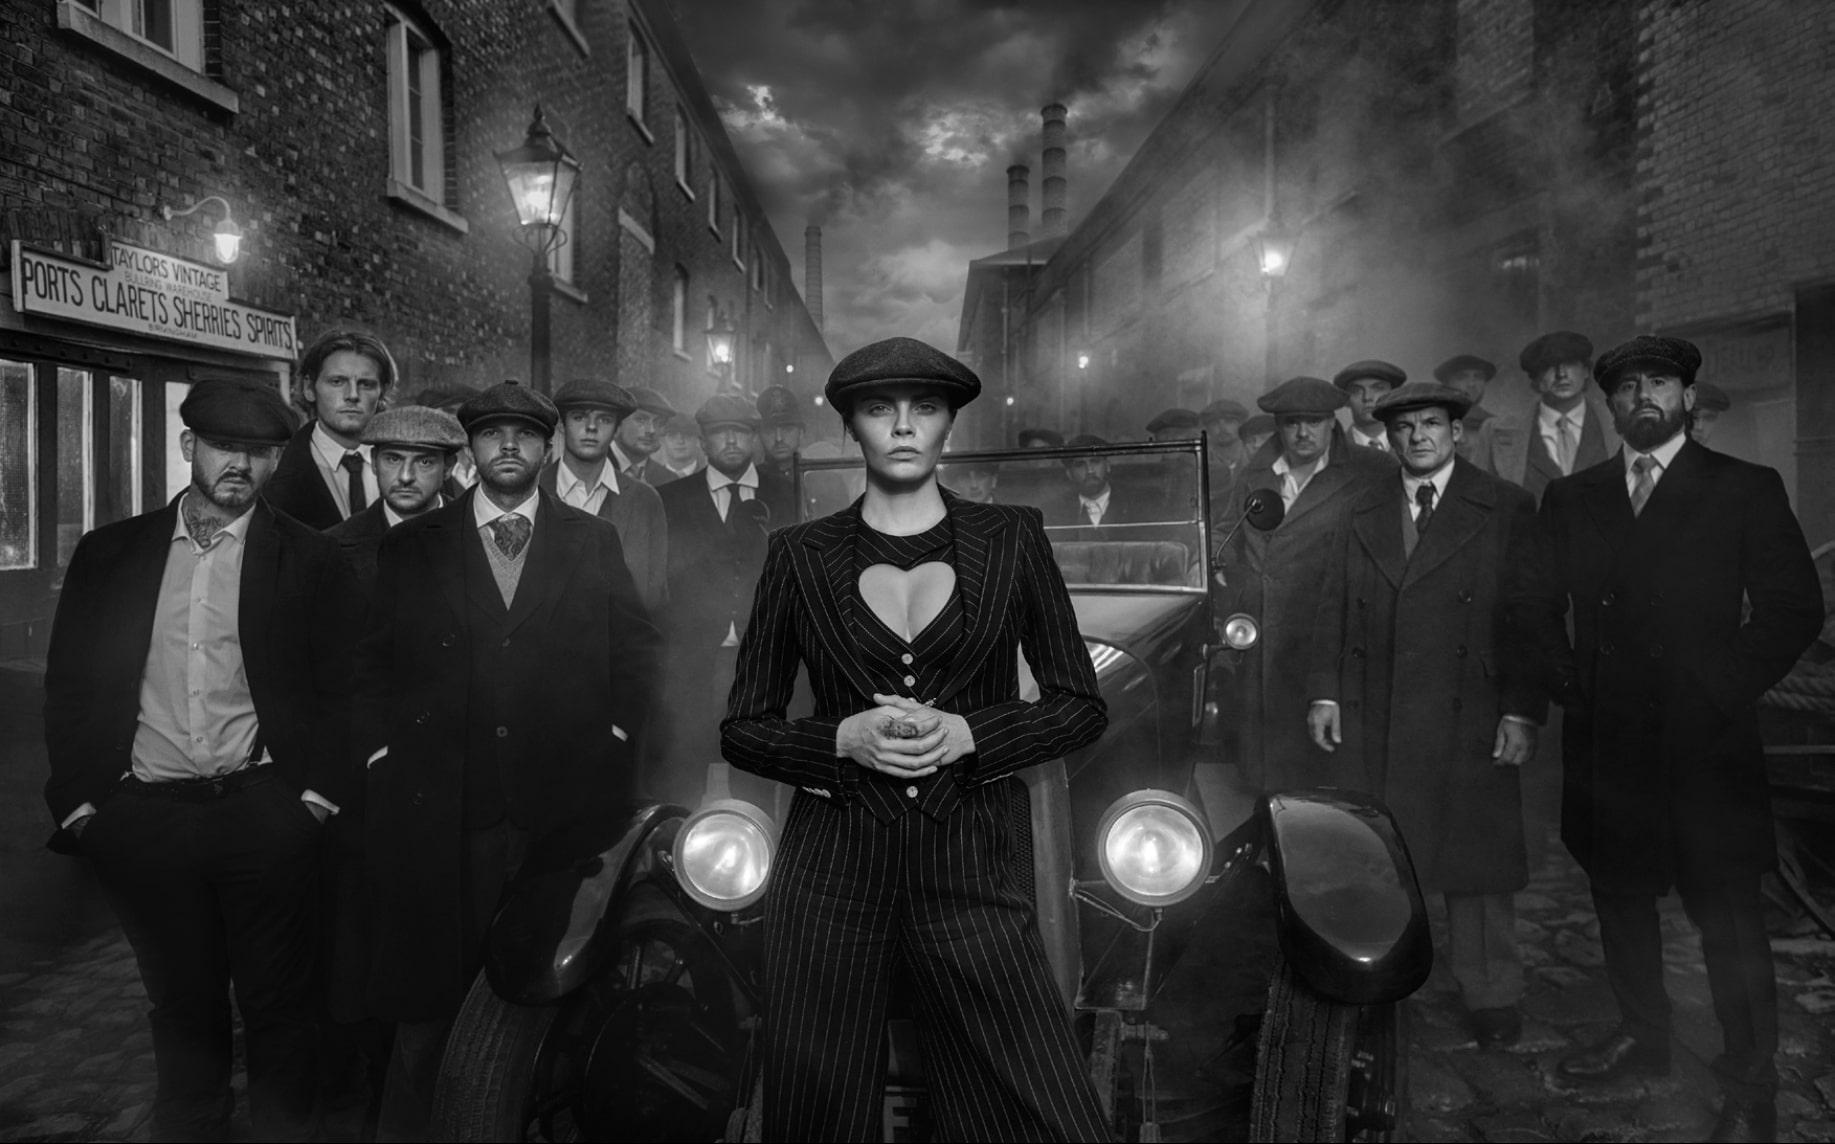 David Yarrow Black and White Photograph - By order of the Peaky Blinders - Cara in the role of Thomas Shelby, 2023